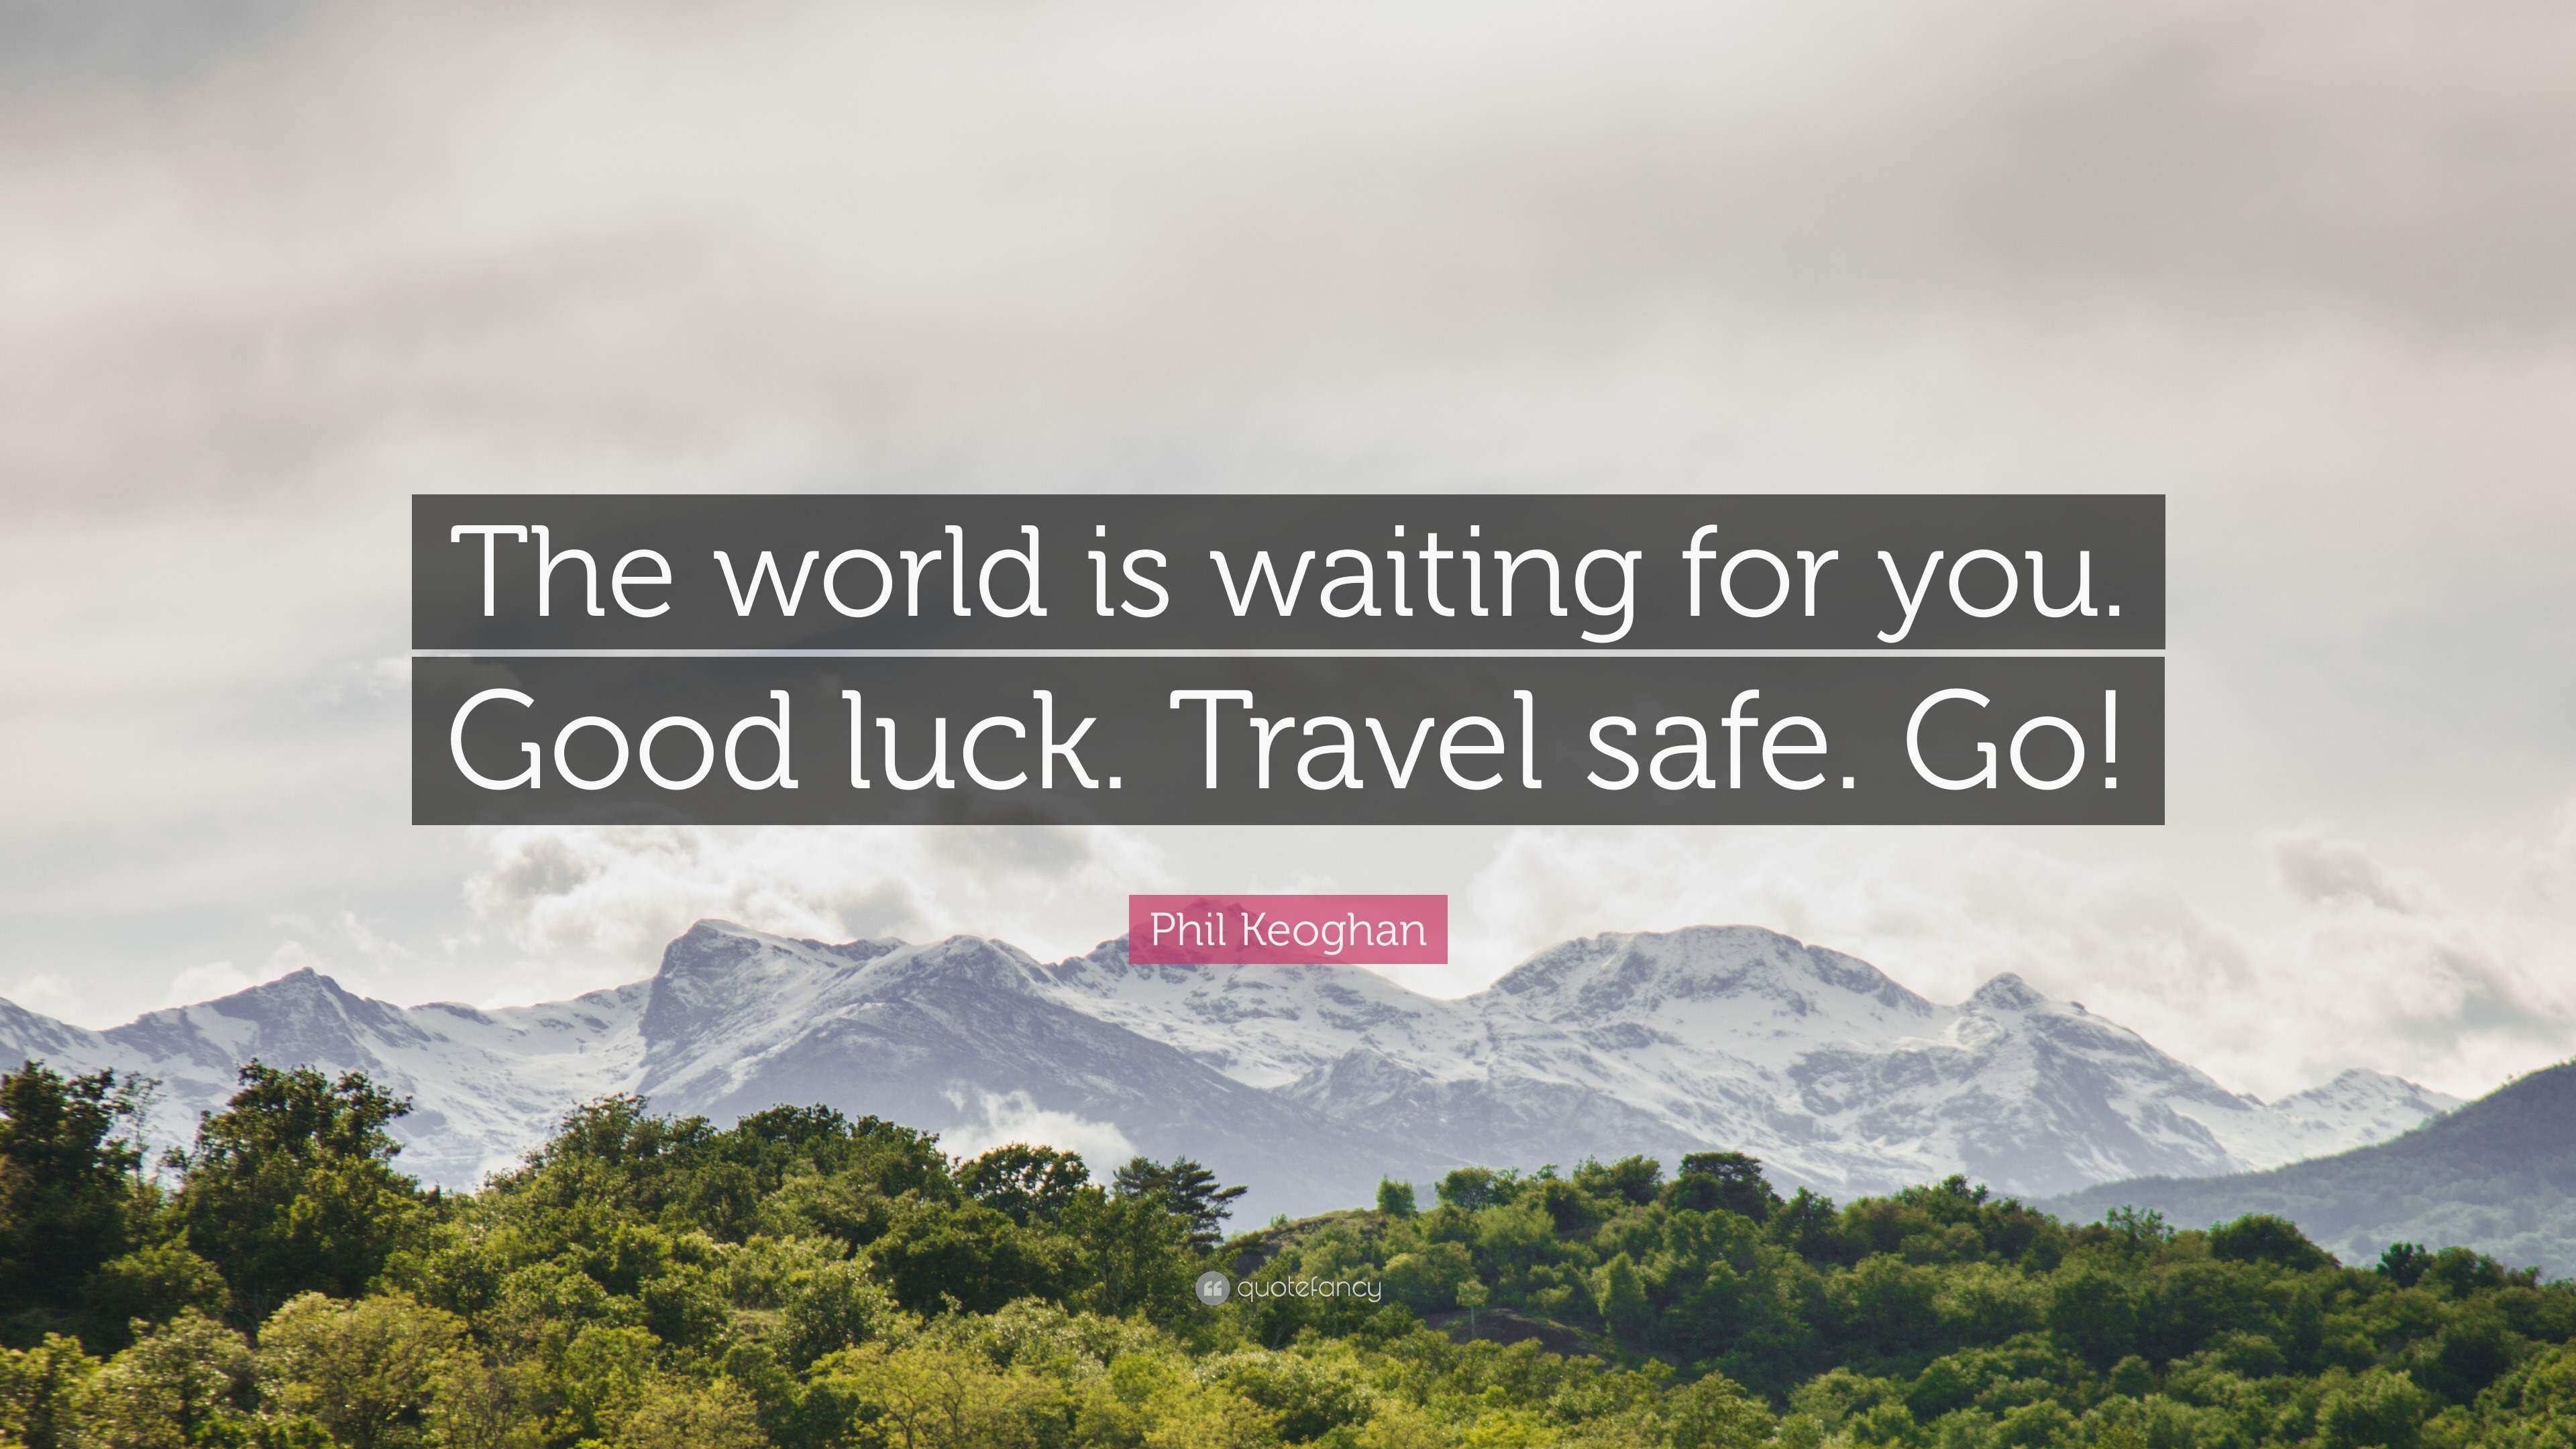 https://quotefancy.com/media/wallpaper/3840x2160/1534619-Phil-Keoghan-Quote-The-world-is-waiting-for-you-Good-luck-Travel.jpg